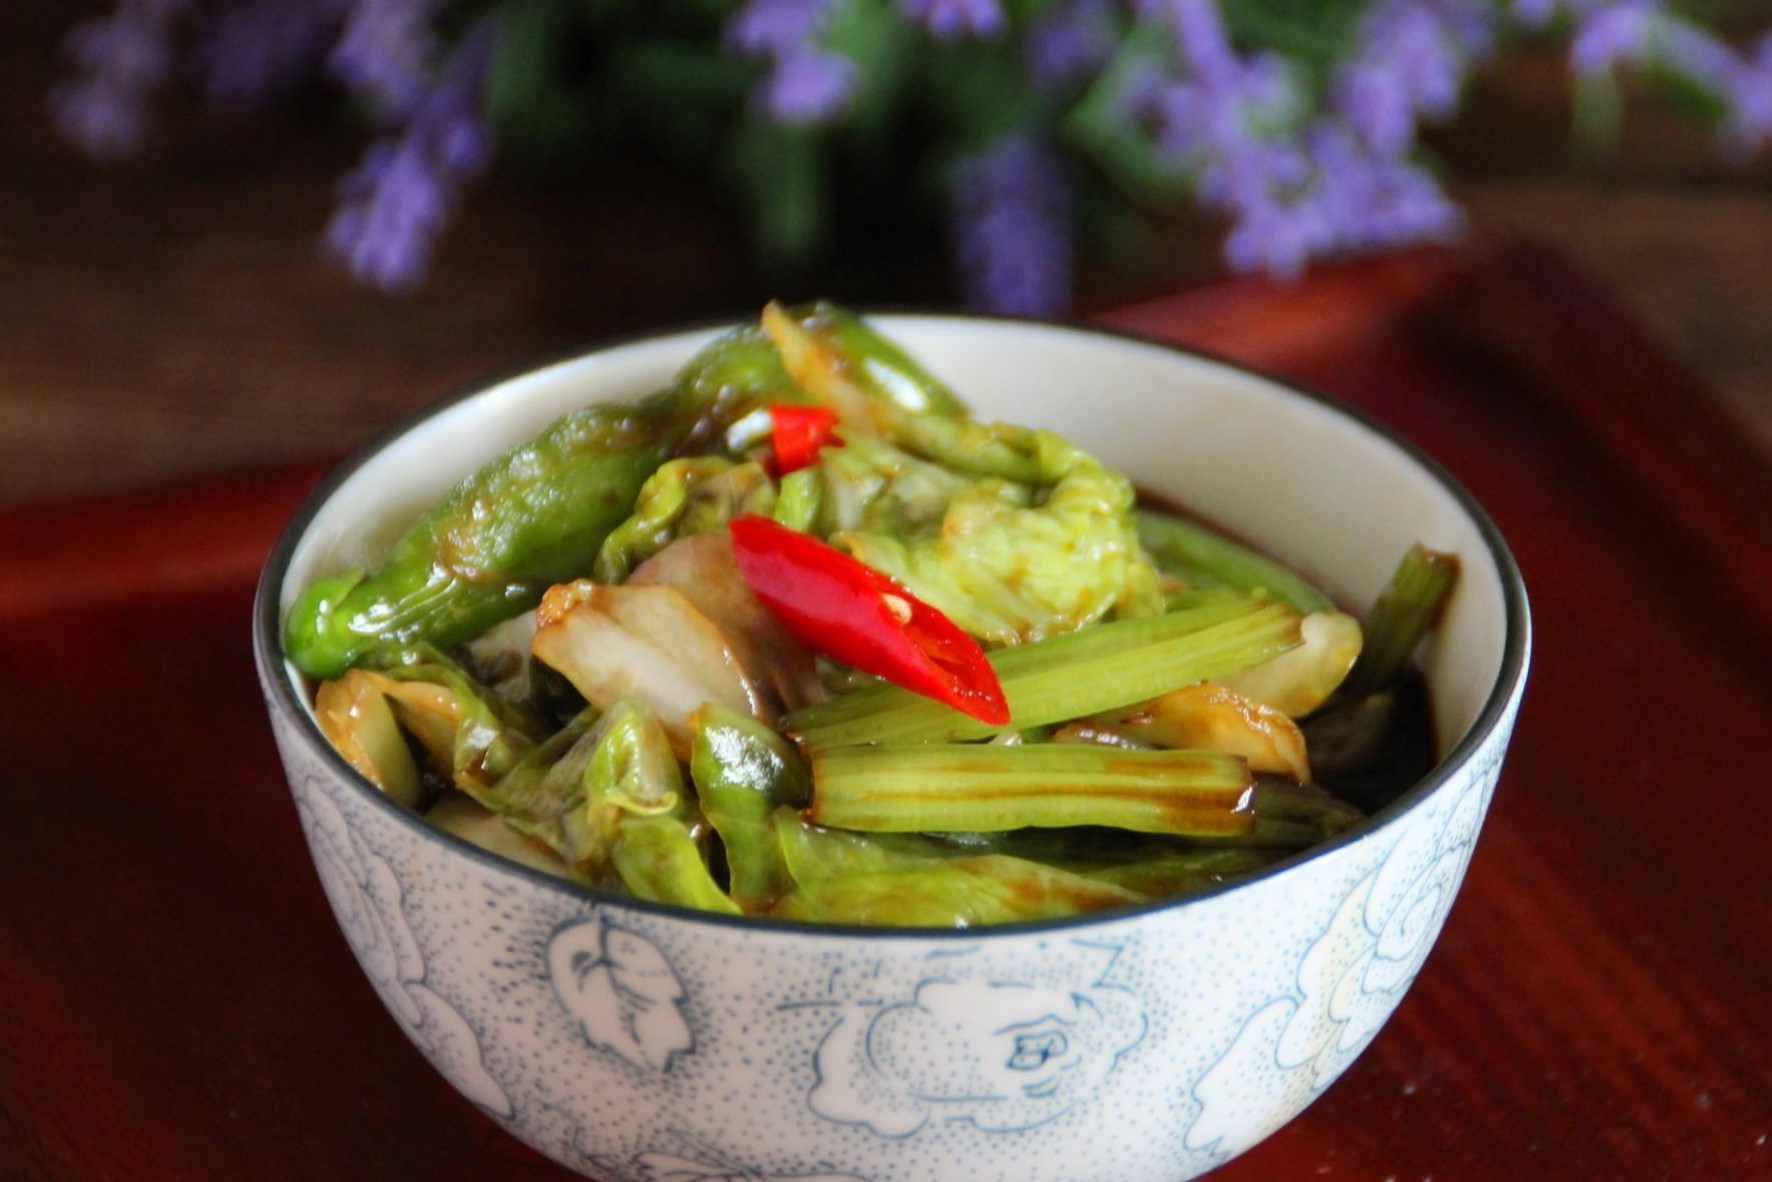 Pickled Chinese cabbage and celery salad recipe 2020